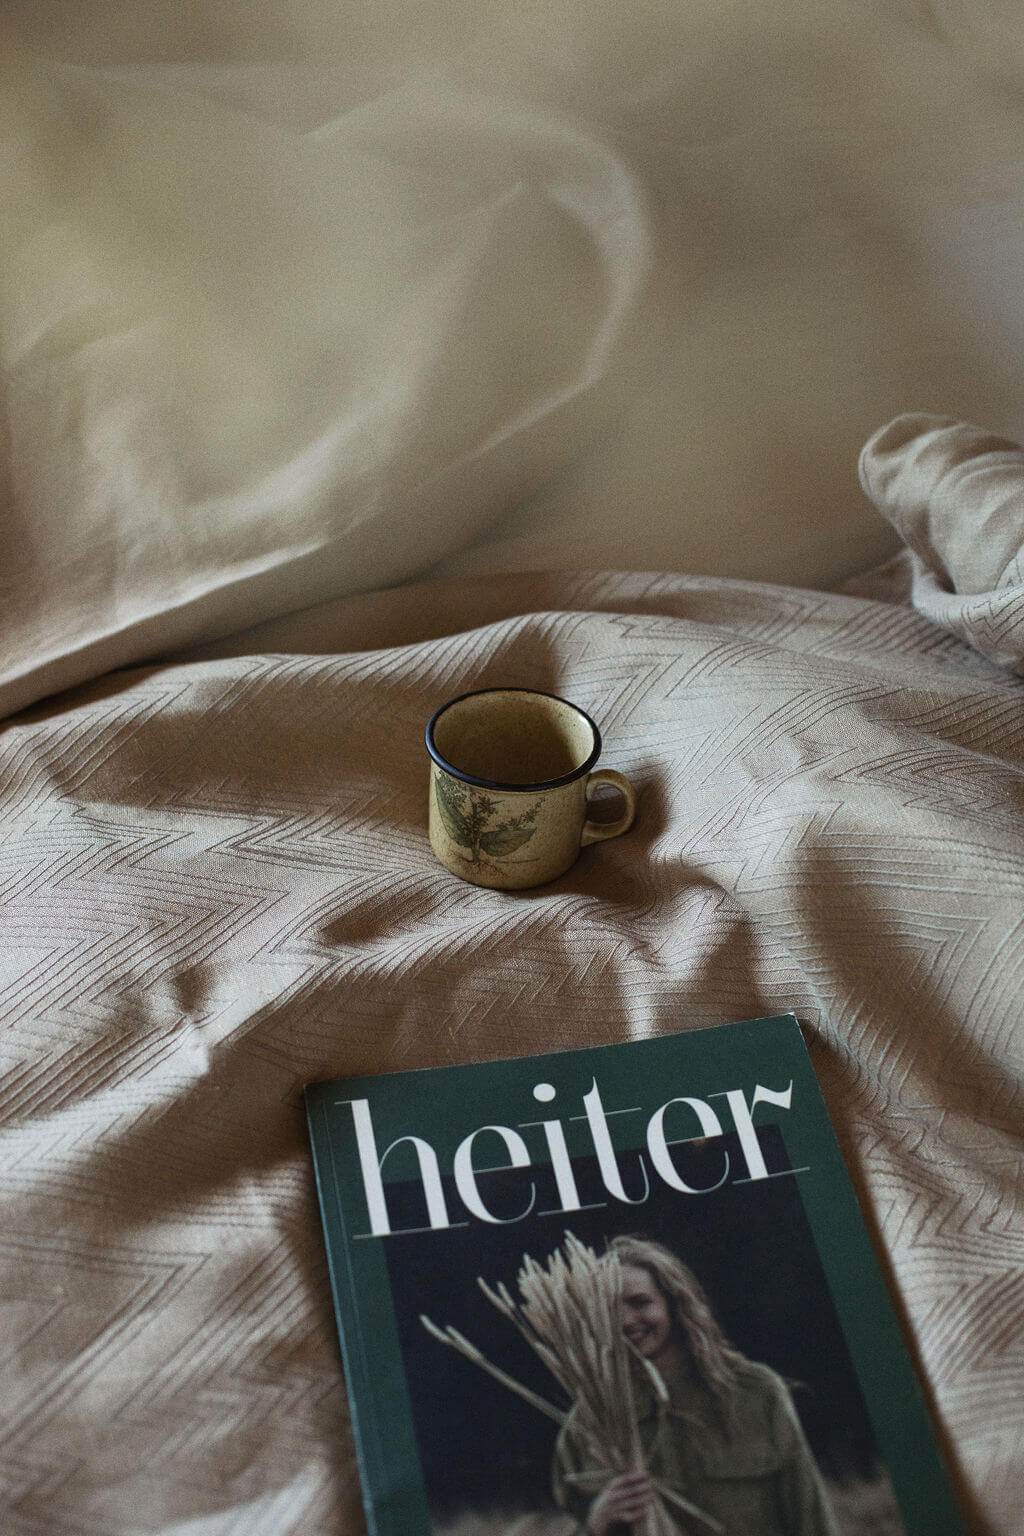 independent magazine Heiter on a bed